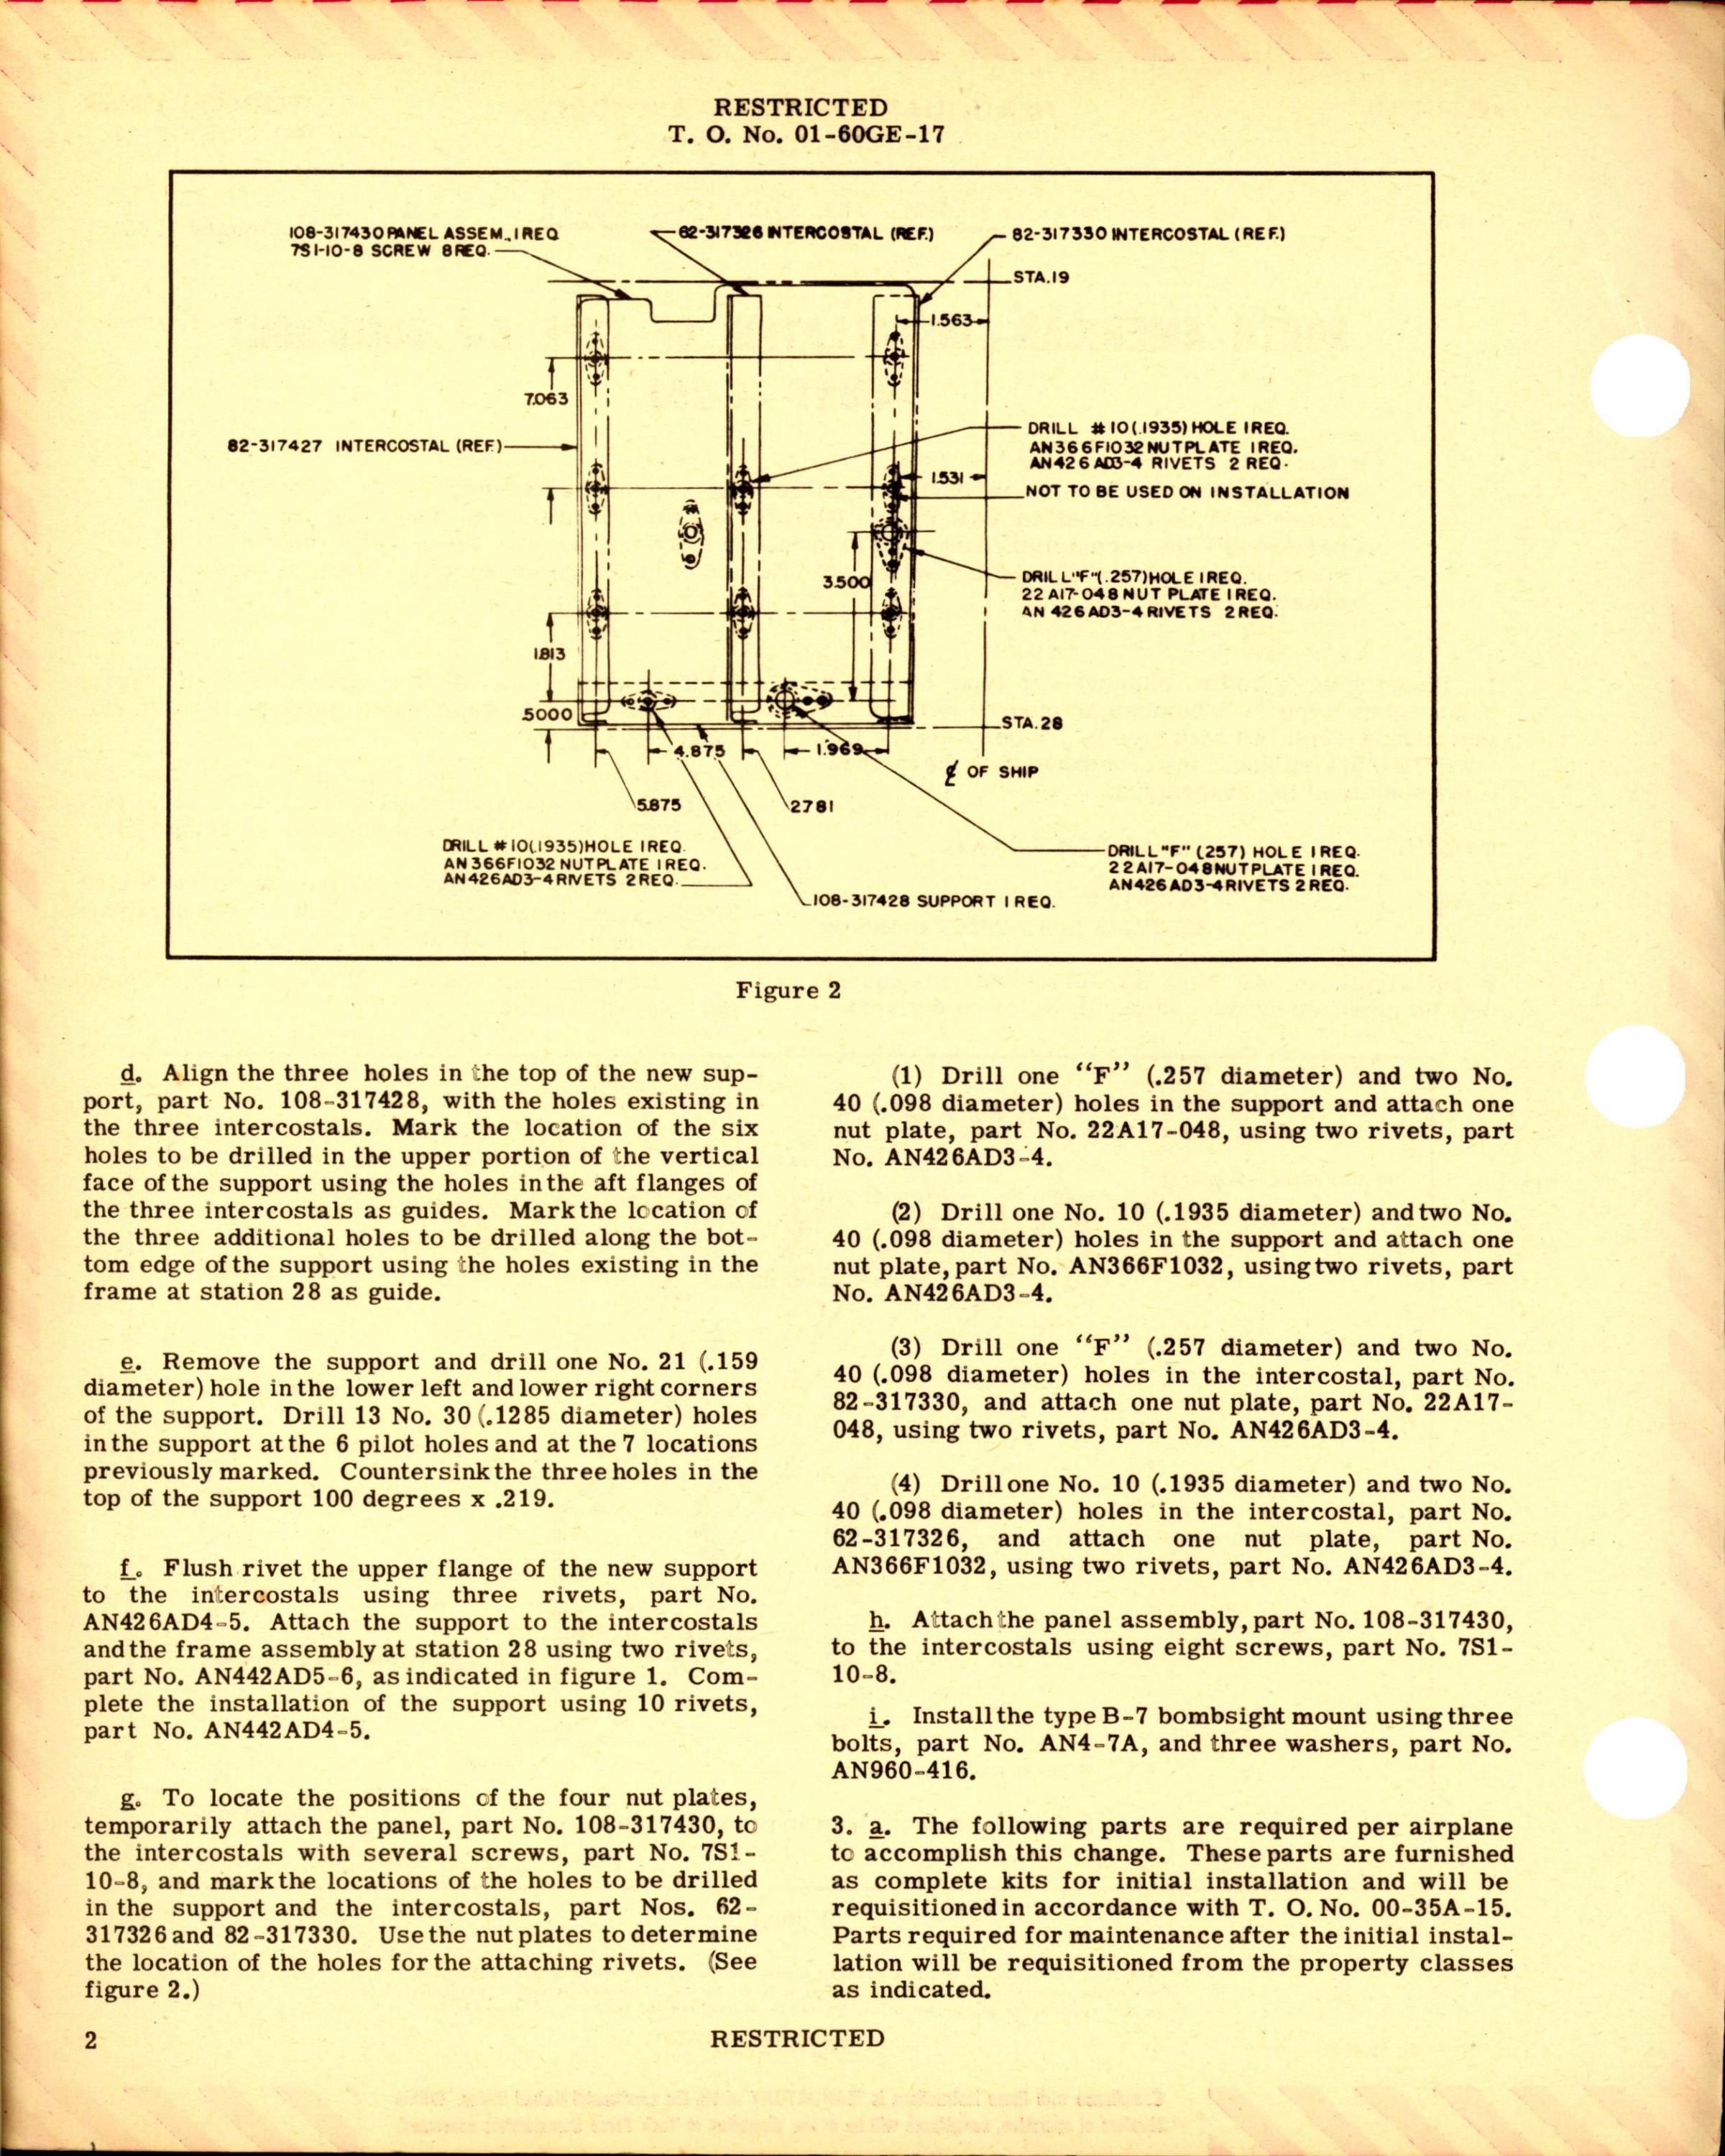 Sample page 2 from AirCorps Library document: Installation of Type B-7 Bombsight Mount for B-25J